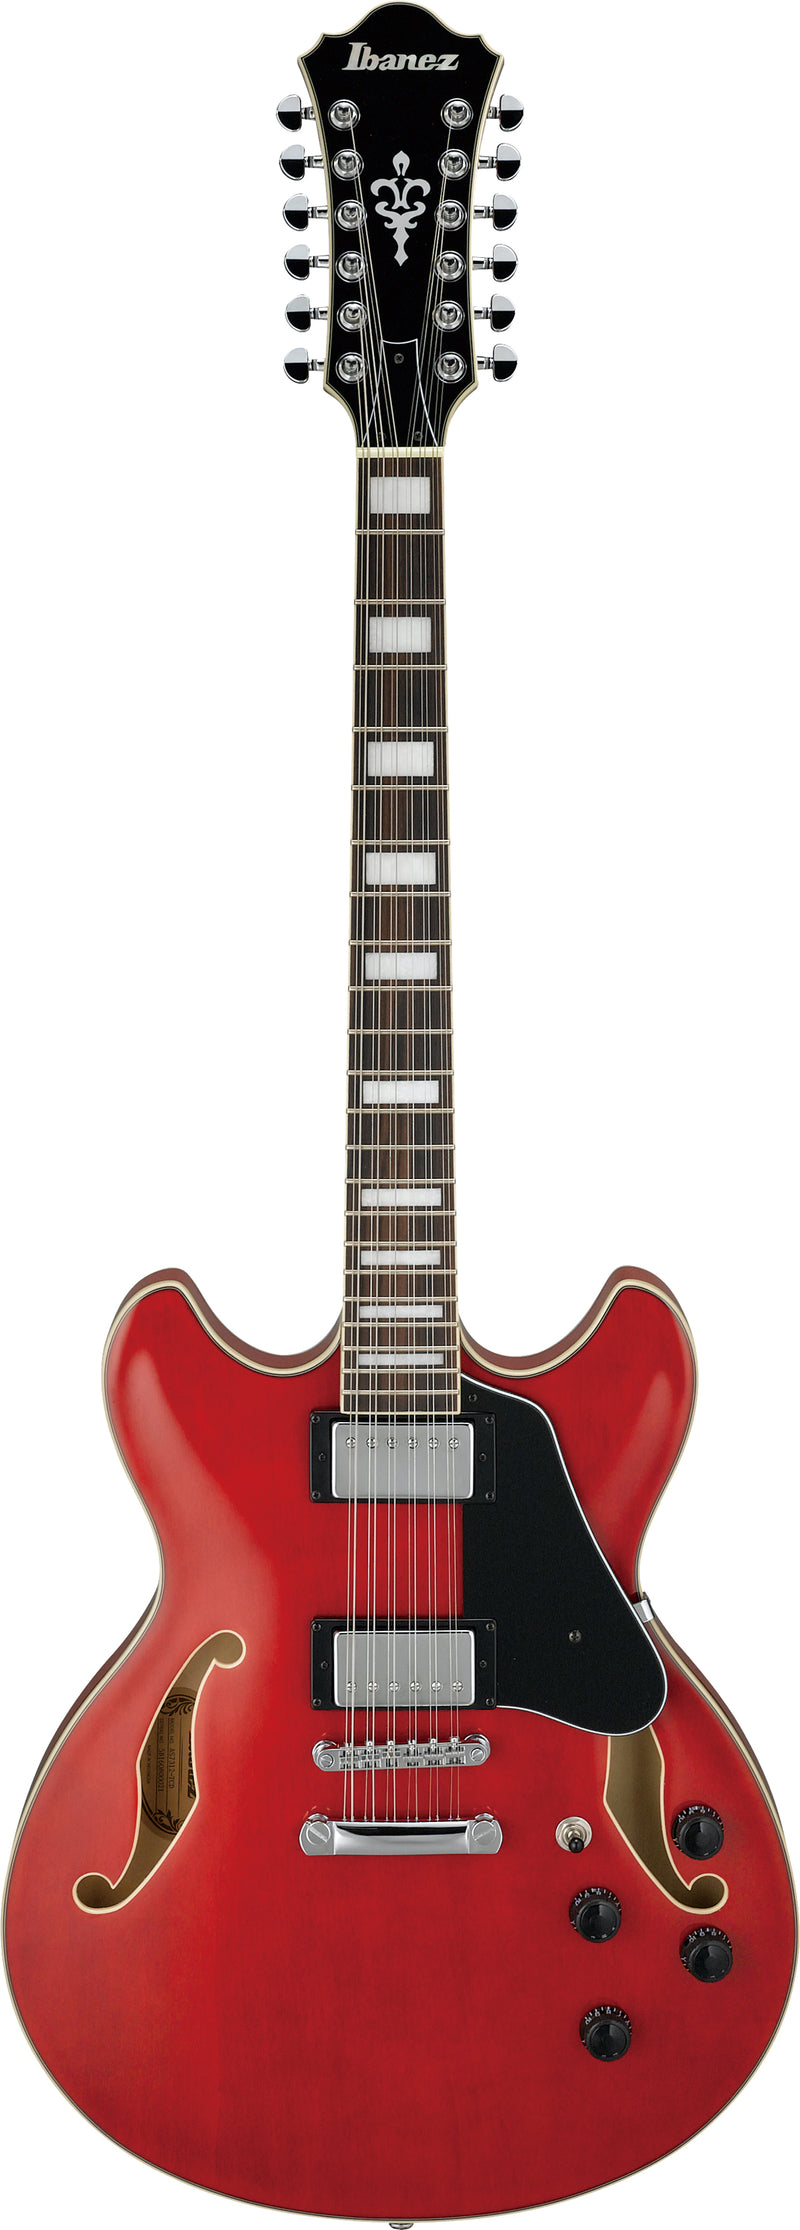 Ibanez AS ARTCORE Series 12 String Semi Hollow-Body Electric Guitar (Transparent Cherry Red)